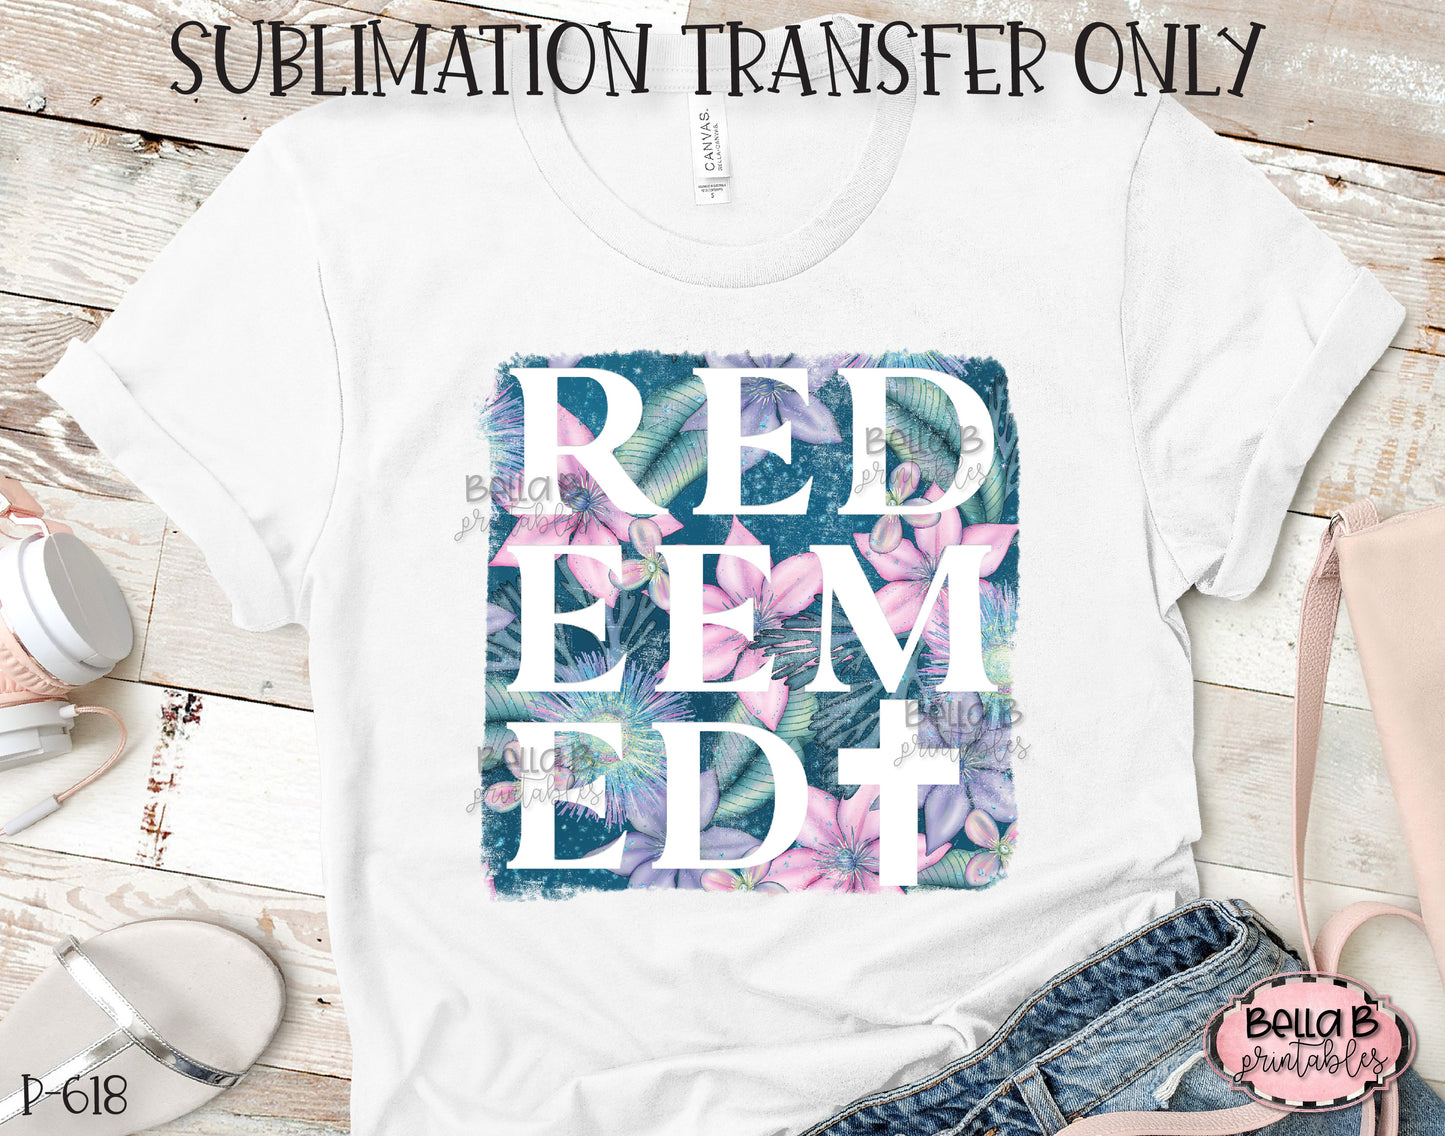 Redeemed Sublimation Transfer, Ready To Press, Heat Press Transfer, Sublimation Print